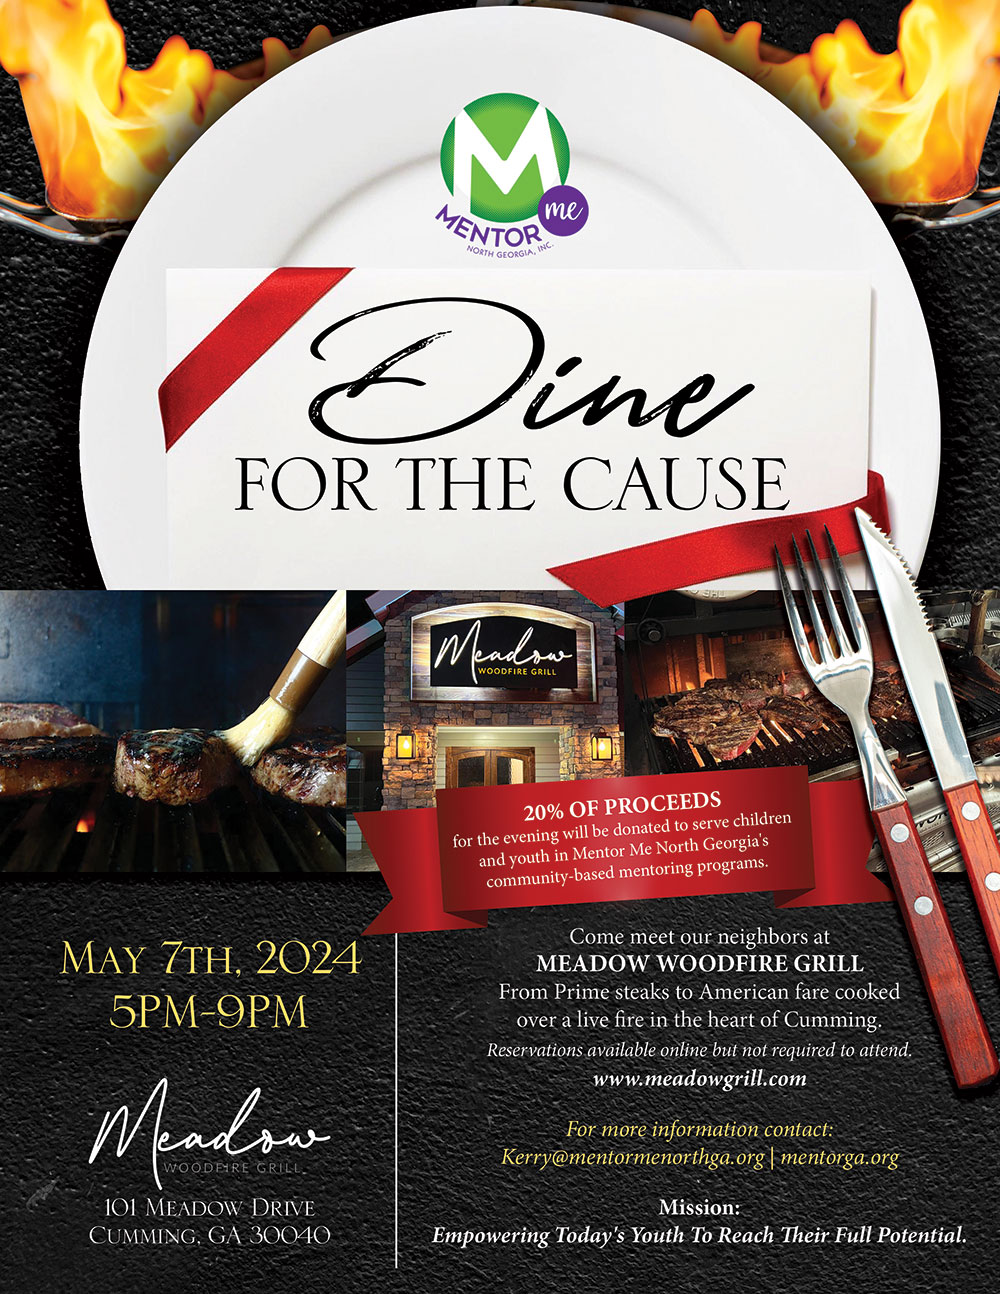 dine for a cause event mentoring programs in north georgia